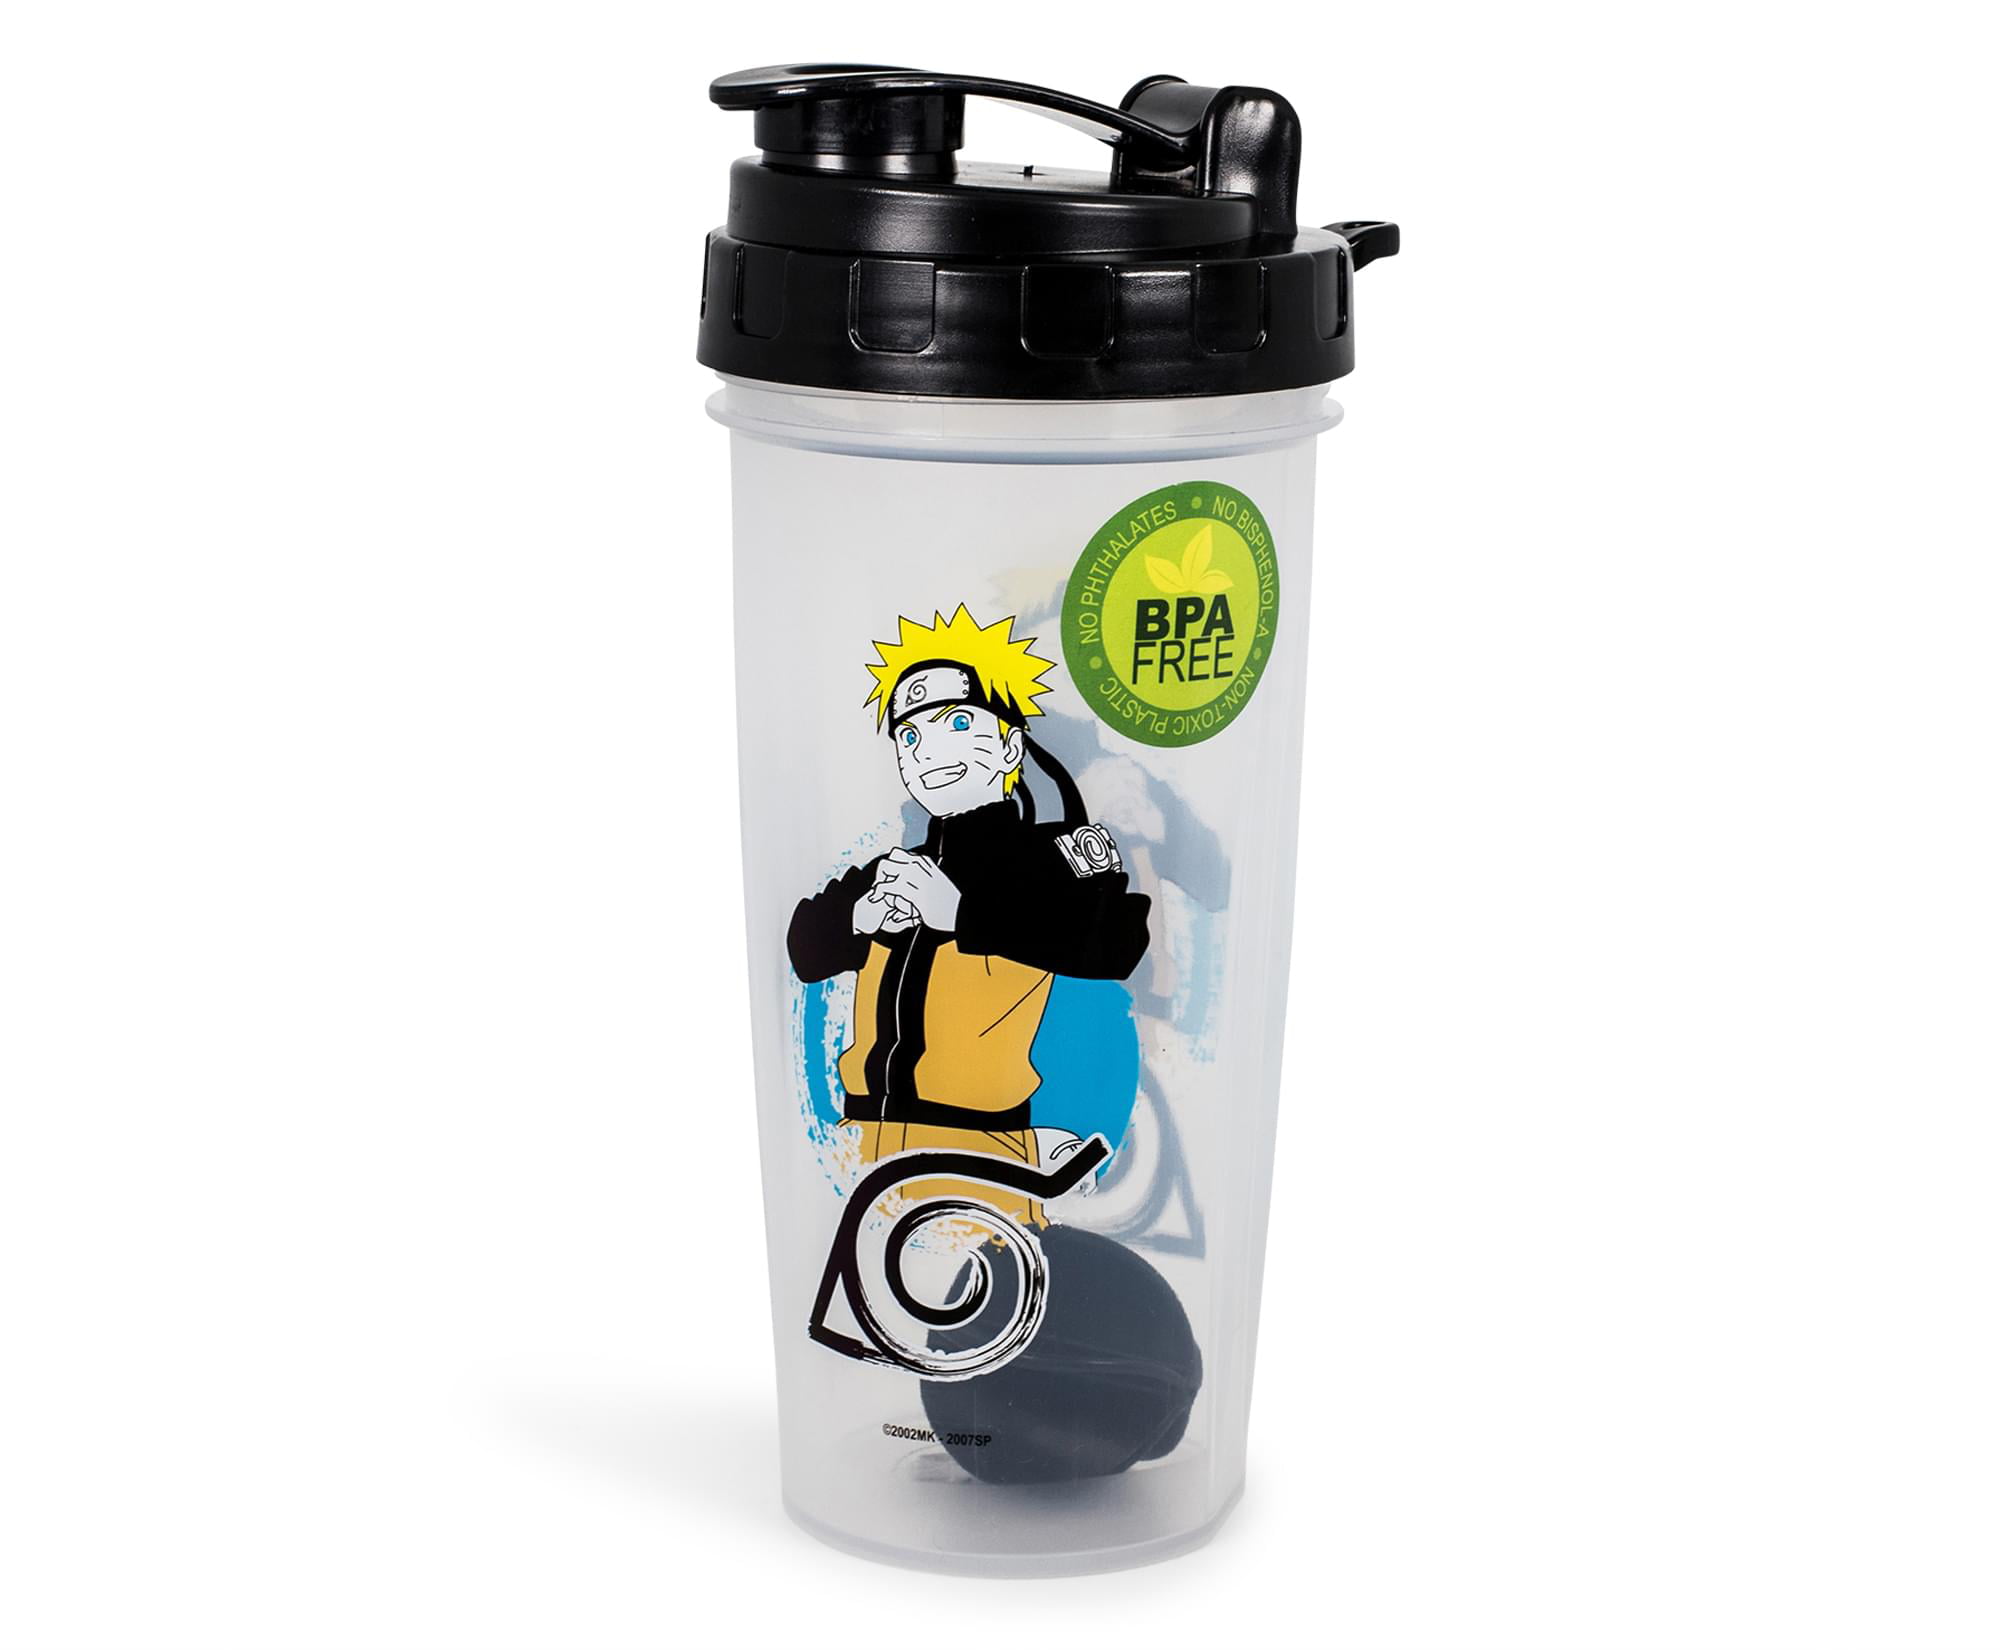 Official Licensed Naruto Shippuden Shaker Bottle THE WILL ON FIRE [CLEAR  20oz] Anime Shaker Bottle, Gymnastic Shaker/Water Bottle for Adults,  (OFFICIALLY LICENSED), By Just Funky 